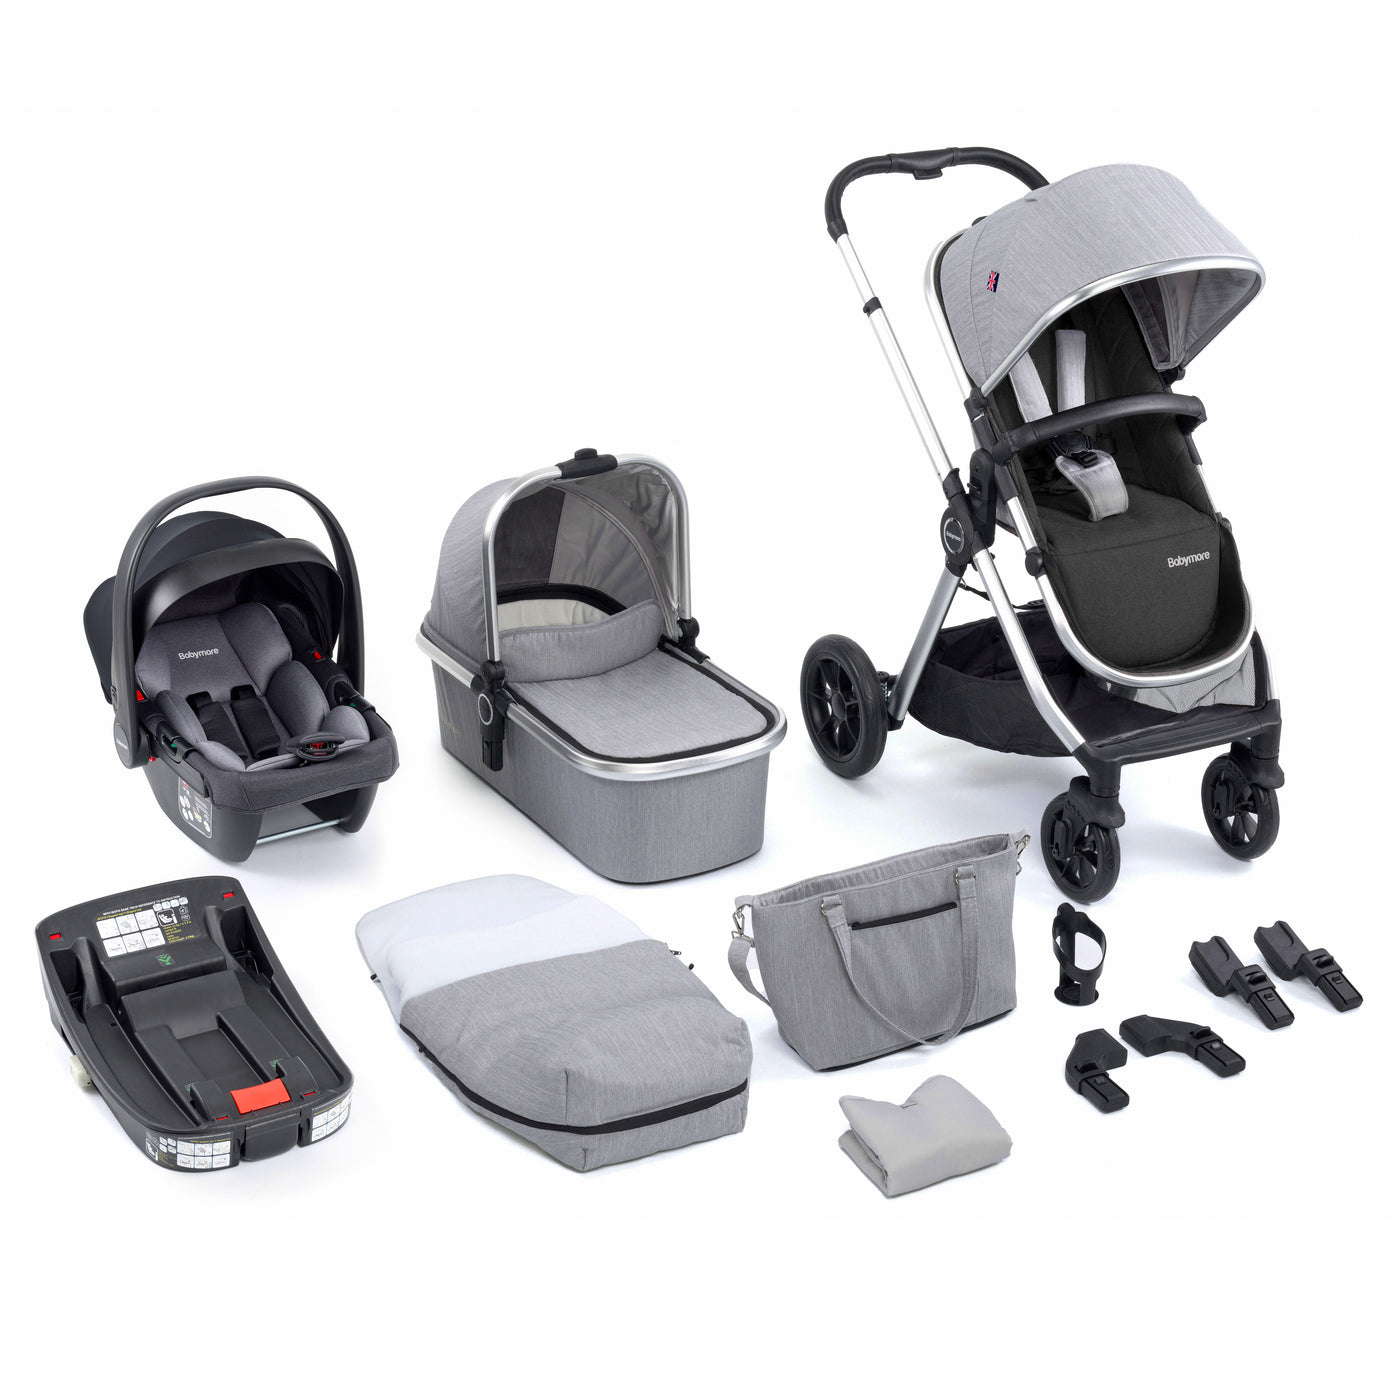 Memore V2 Travel System 13 Piece Coco I-Size Car Seat with Isofix Base